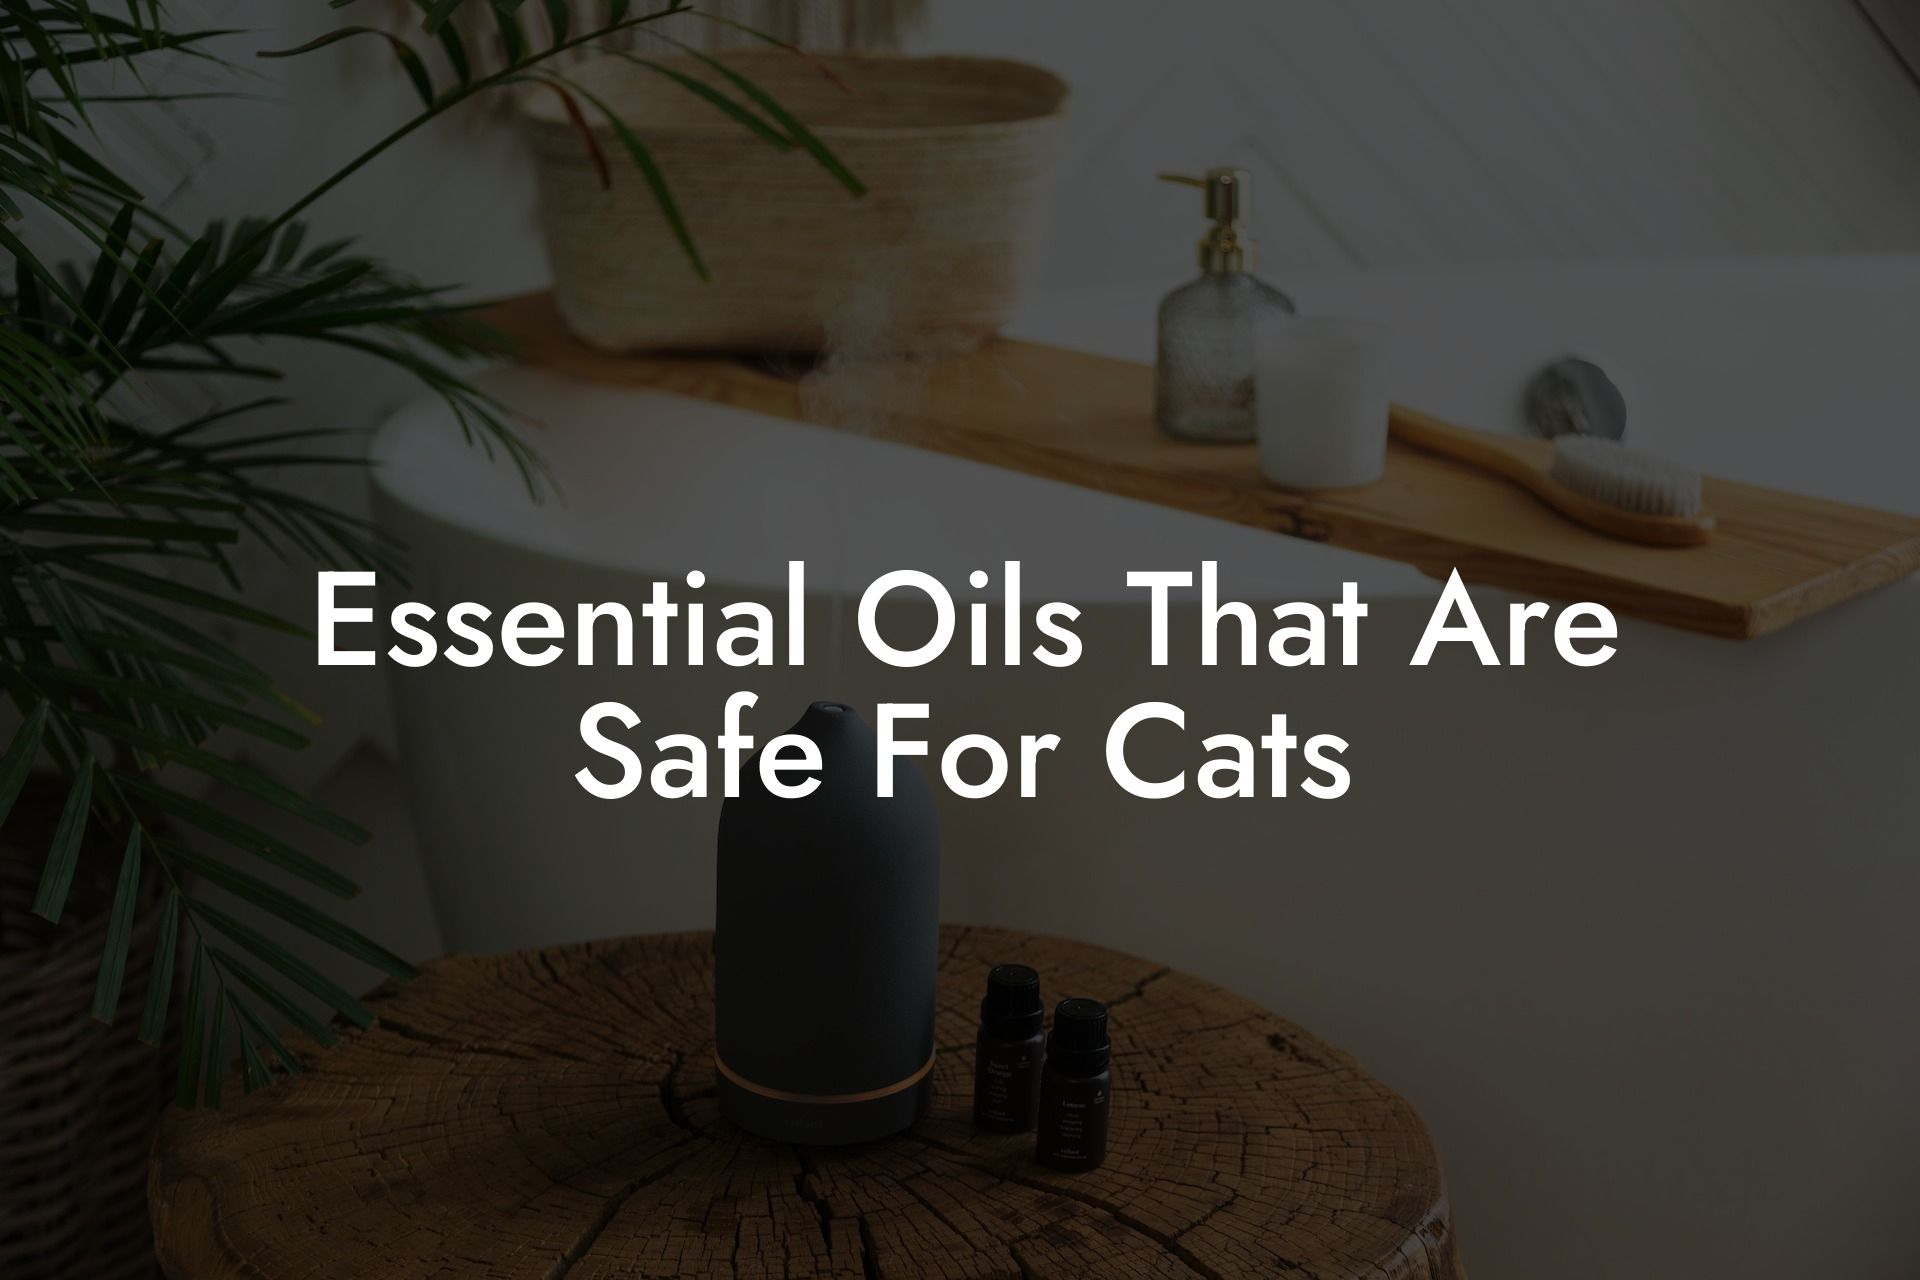 Essential Oils That Are Safe For Cats